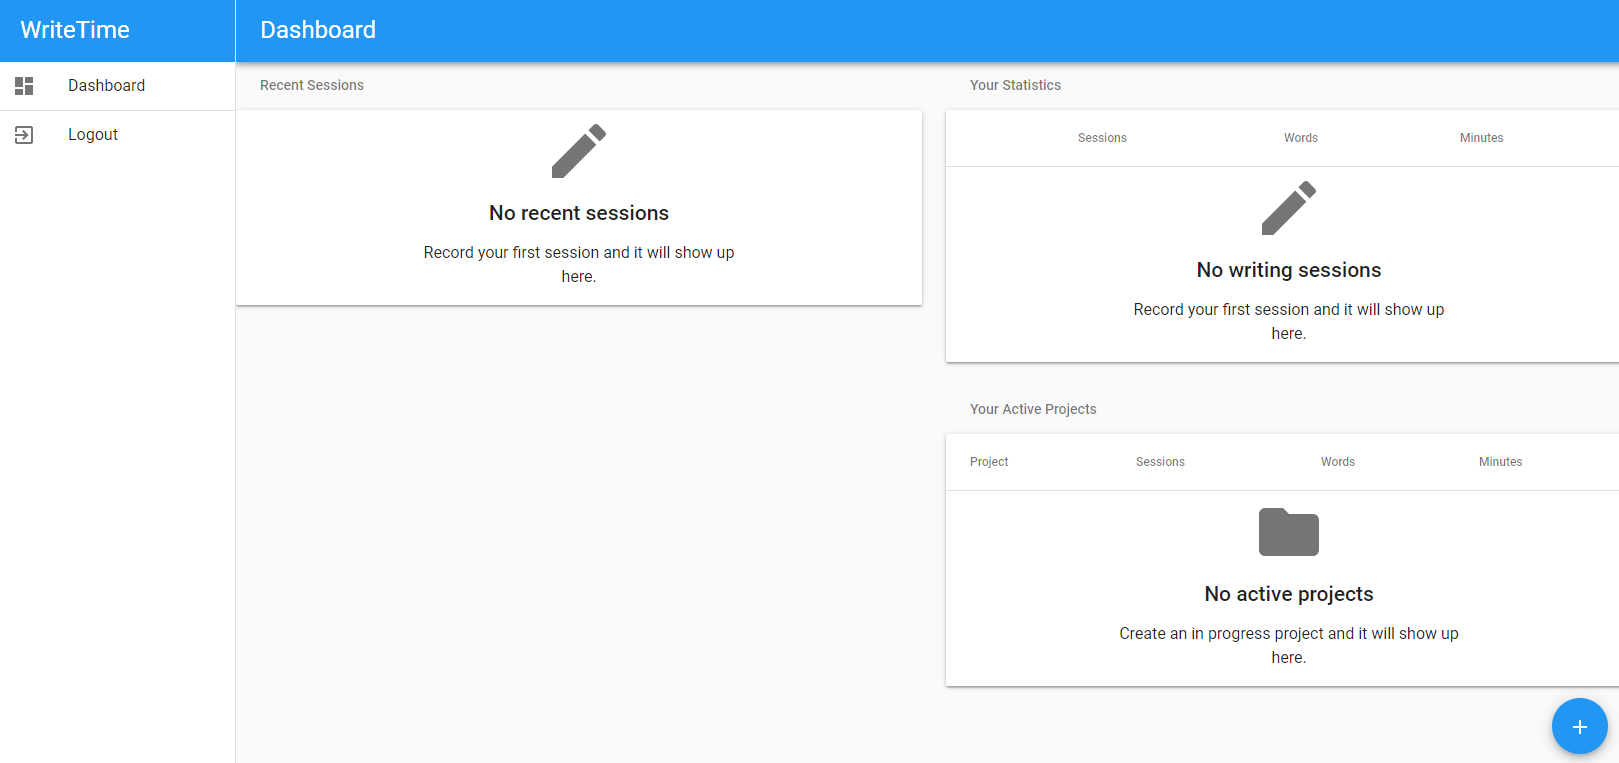 WriteTime dashboard for a new user